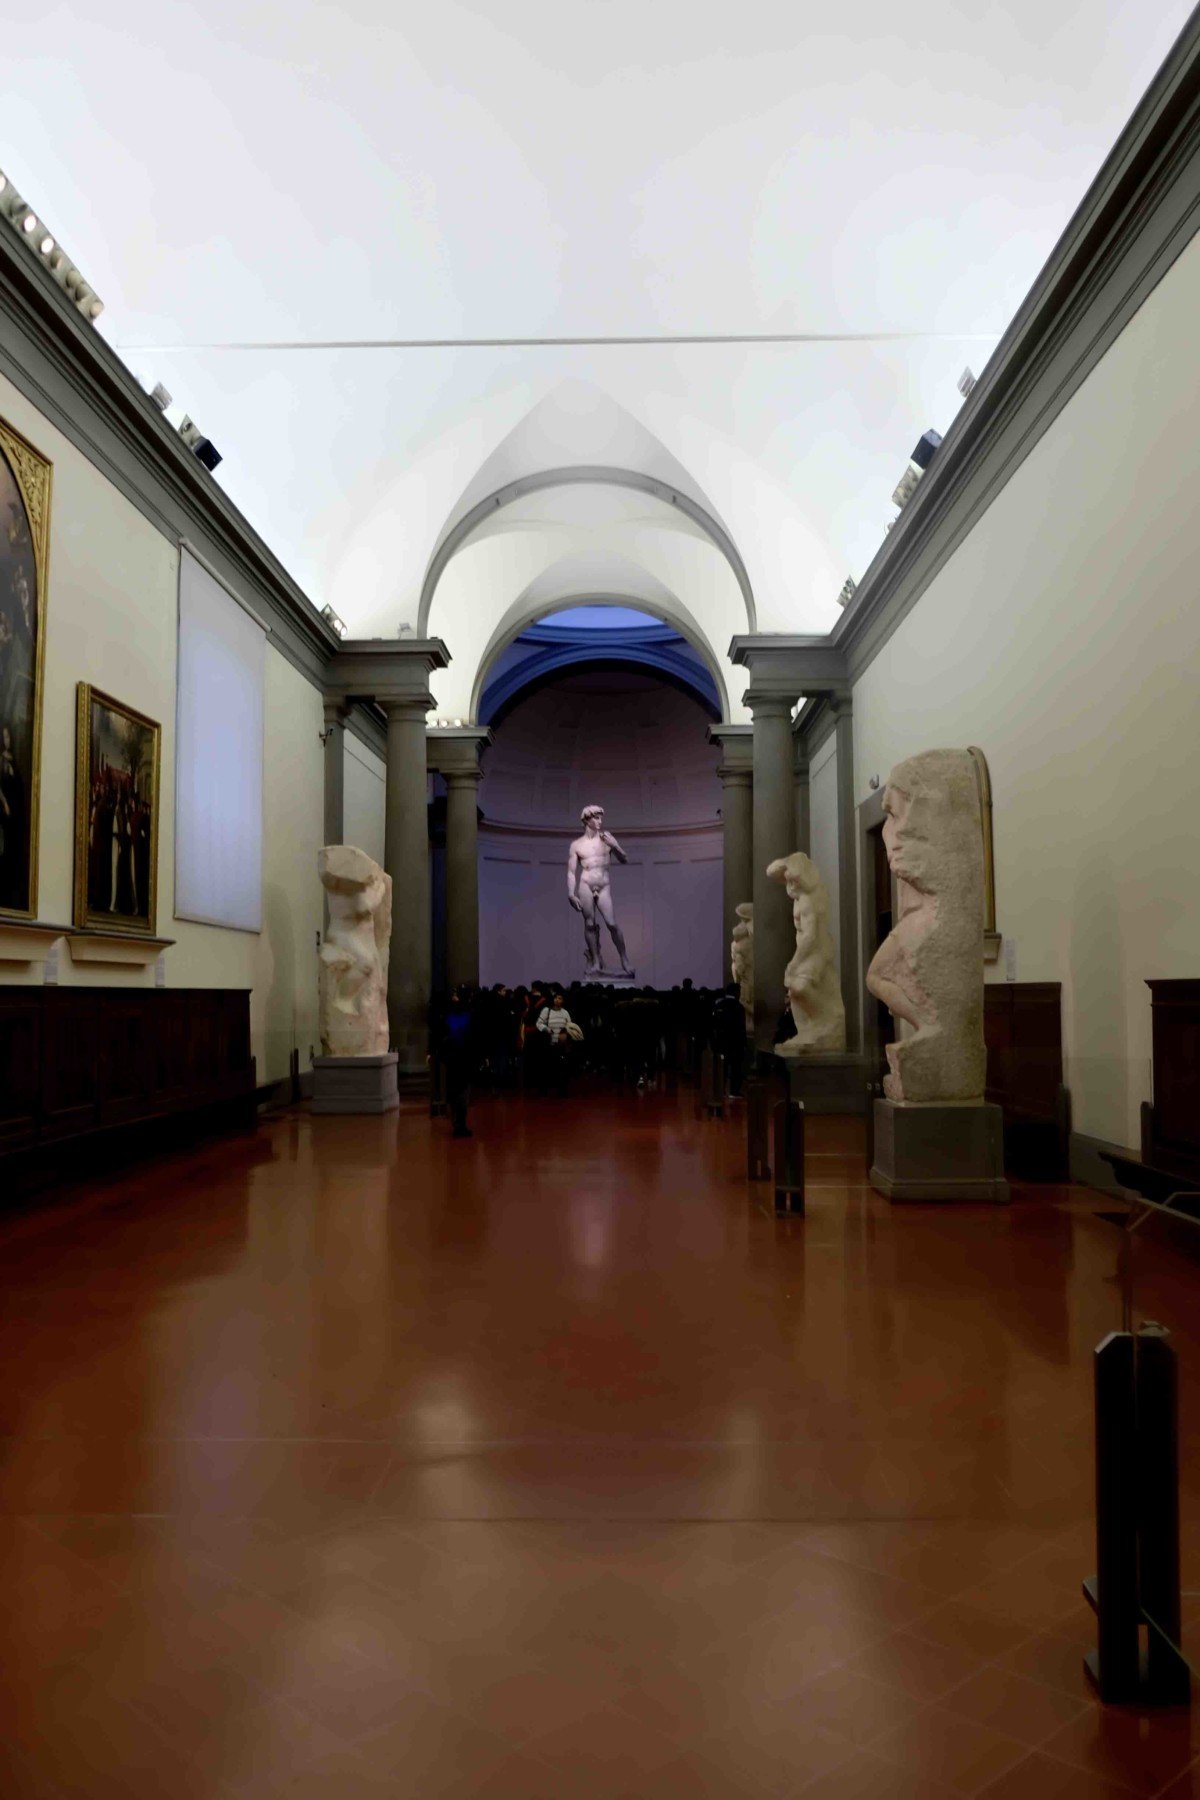 Visit Florence and Michelangelo's David and Duomo with Livitaly the gallery